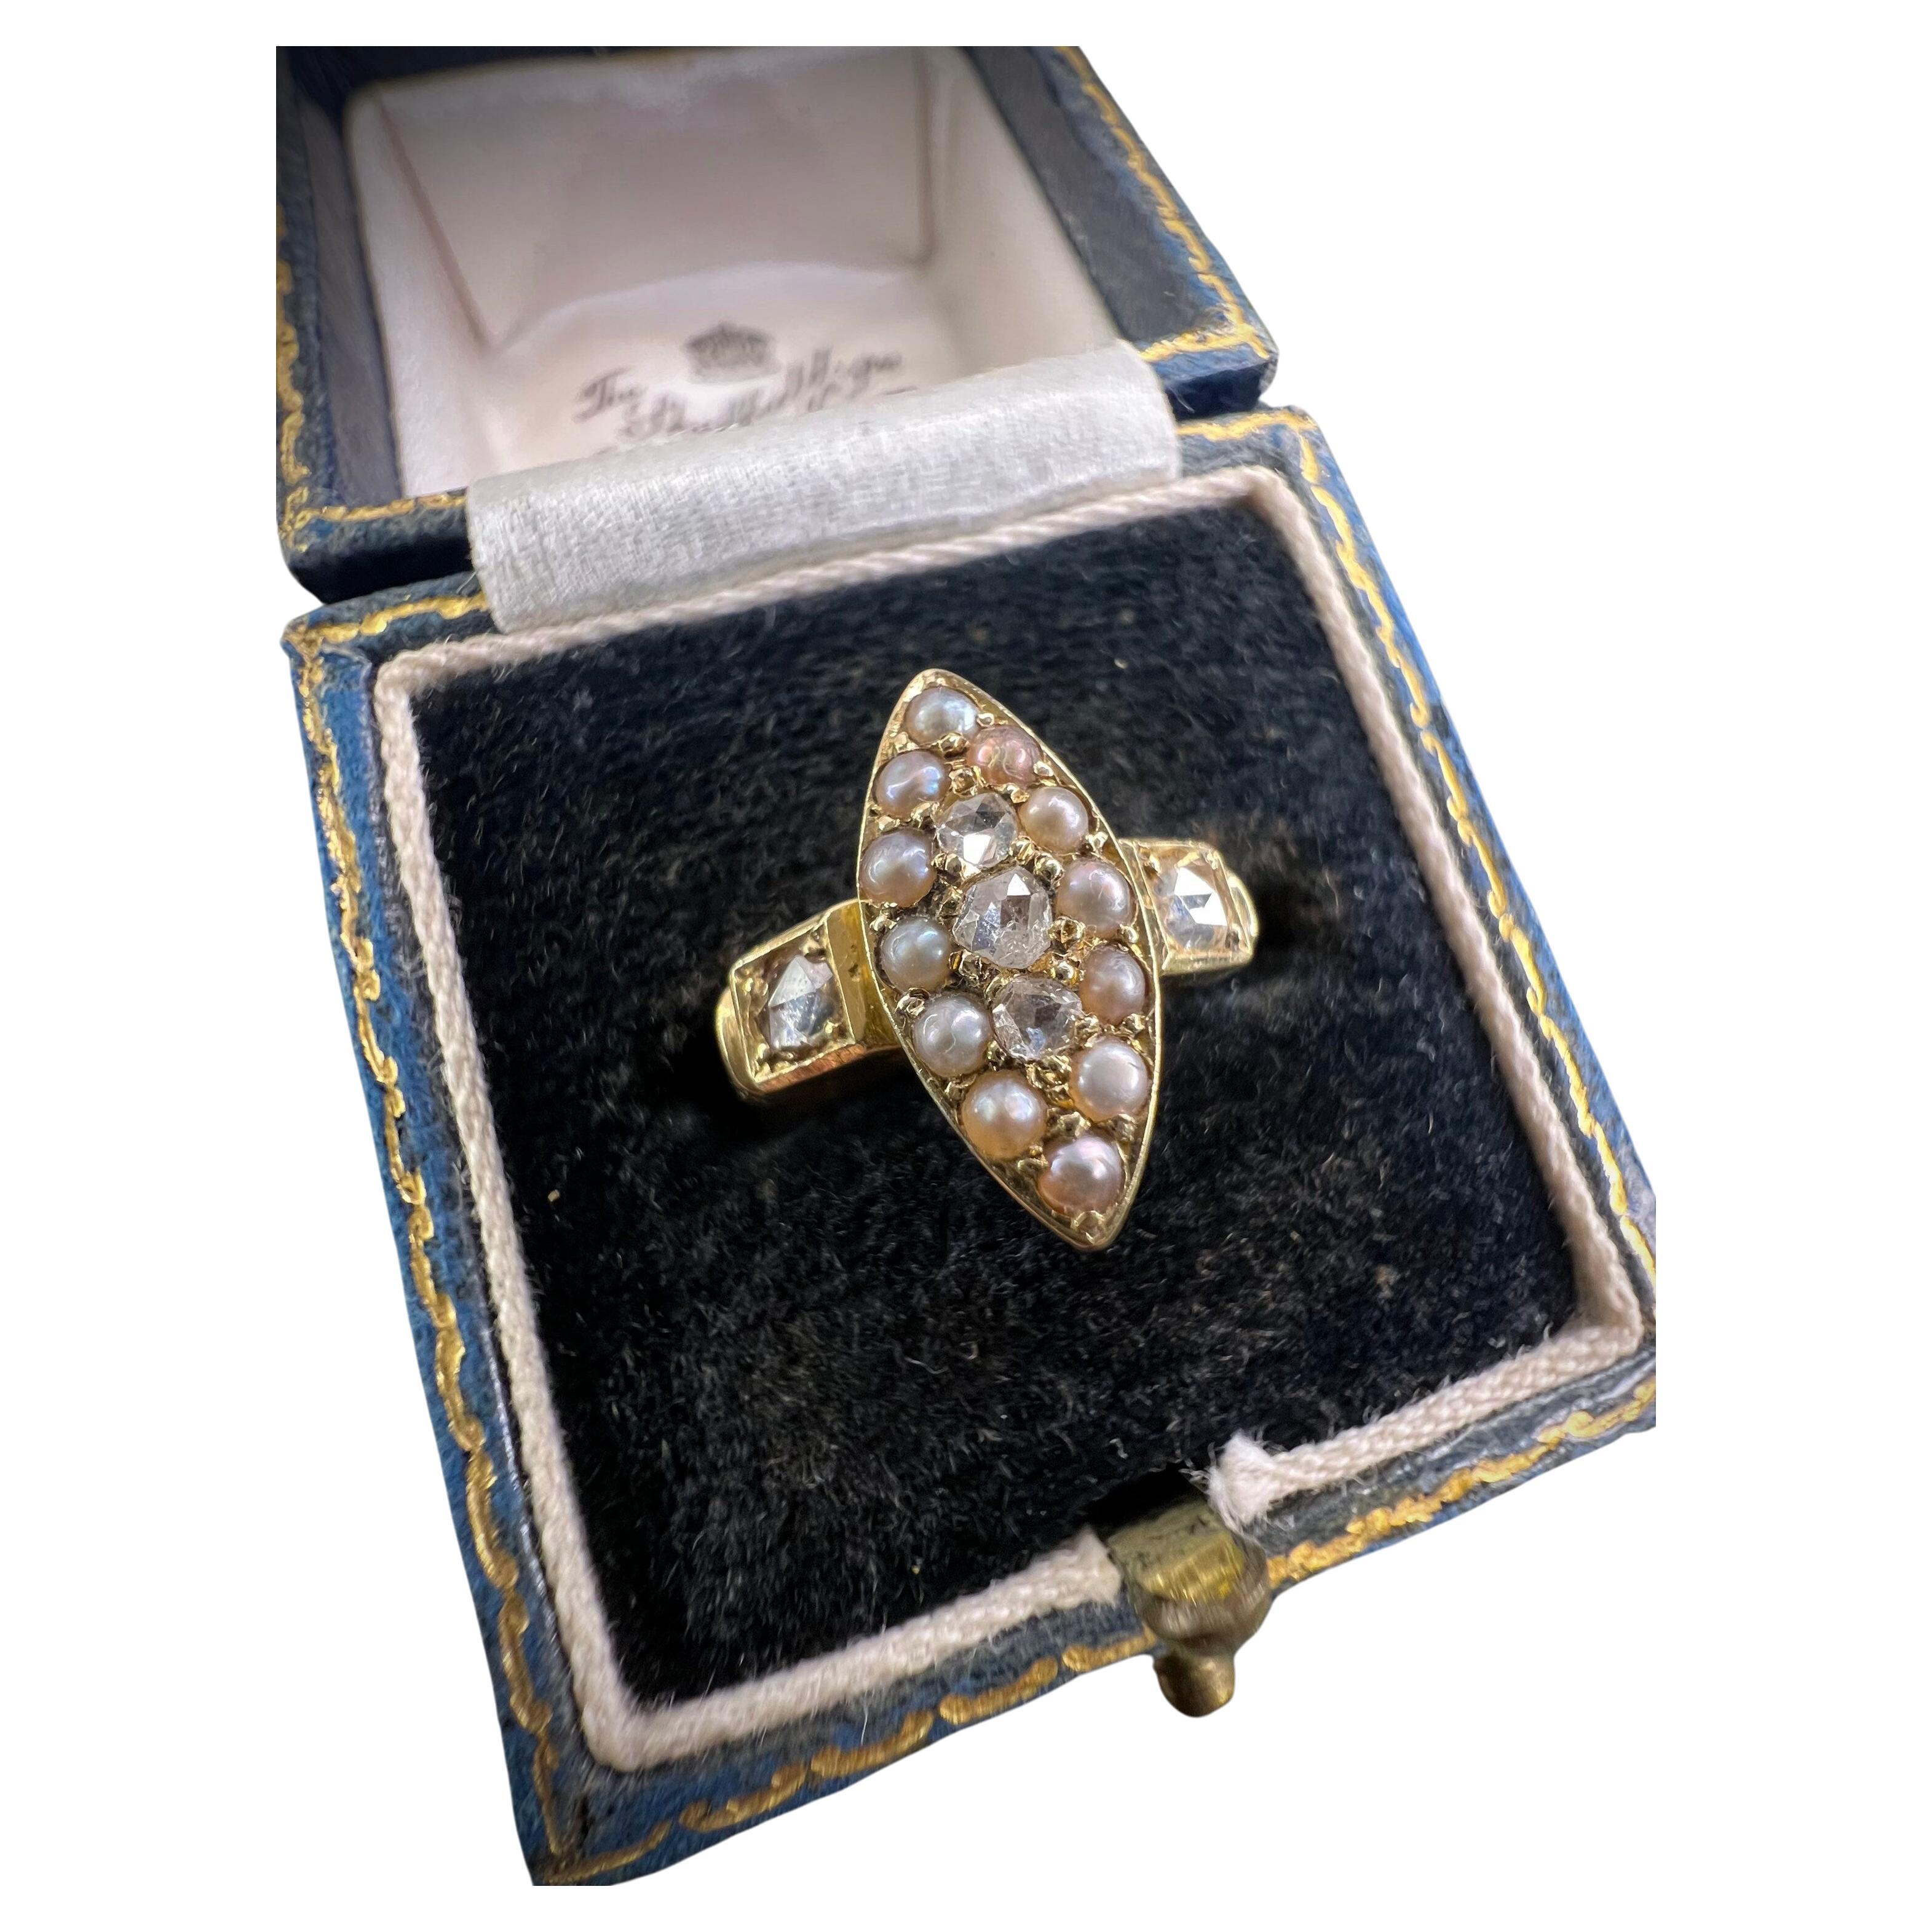 Antique 15ct Gold Edwardian Diamond & Pearl Marquise Ring